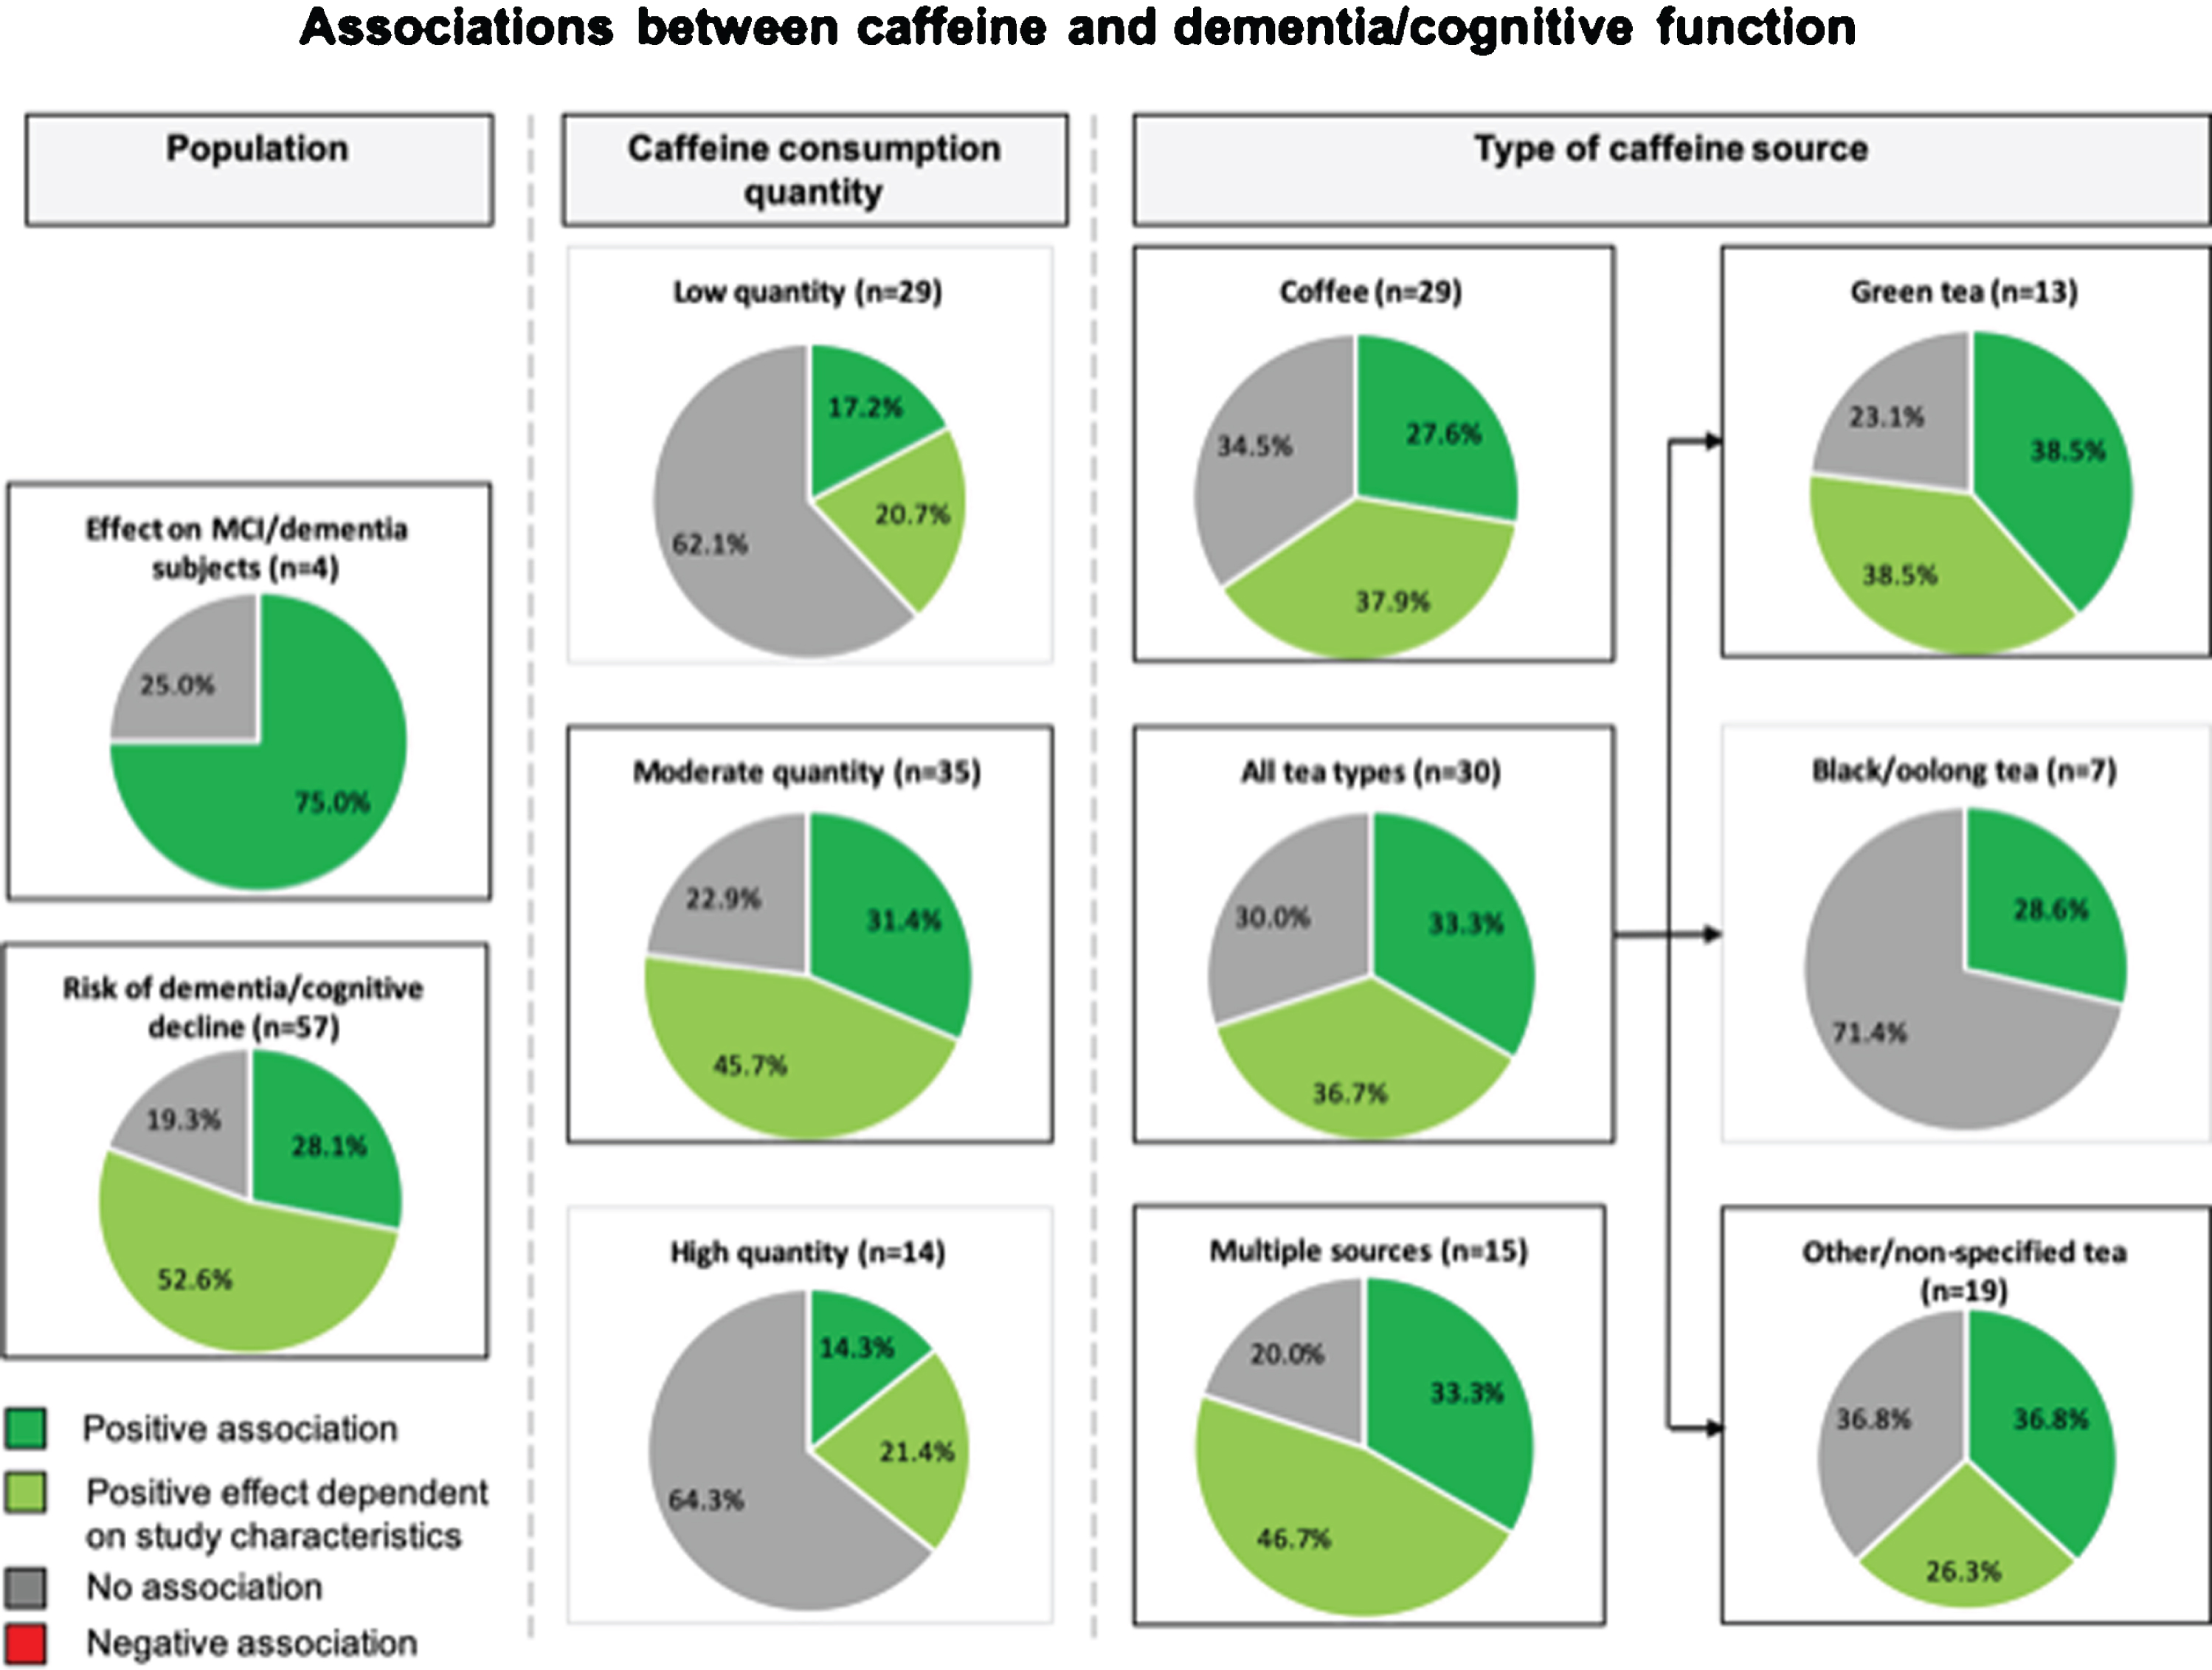 A Study outcomes for the association between caffeine and dementia and/or cognitive function. Pie charts show study outcomes based on population, caffeine consumption dosage and type of caffeine source: positive effect (darker green), positive effect dependent on study characteristics (lighter green), no effect (gray), and negative effect (red [none observed]). Outlined charts indicate a predominant positive outcome.